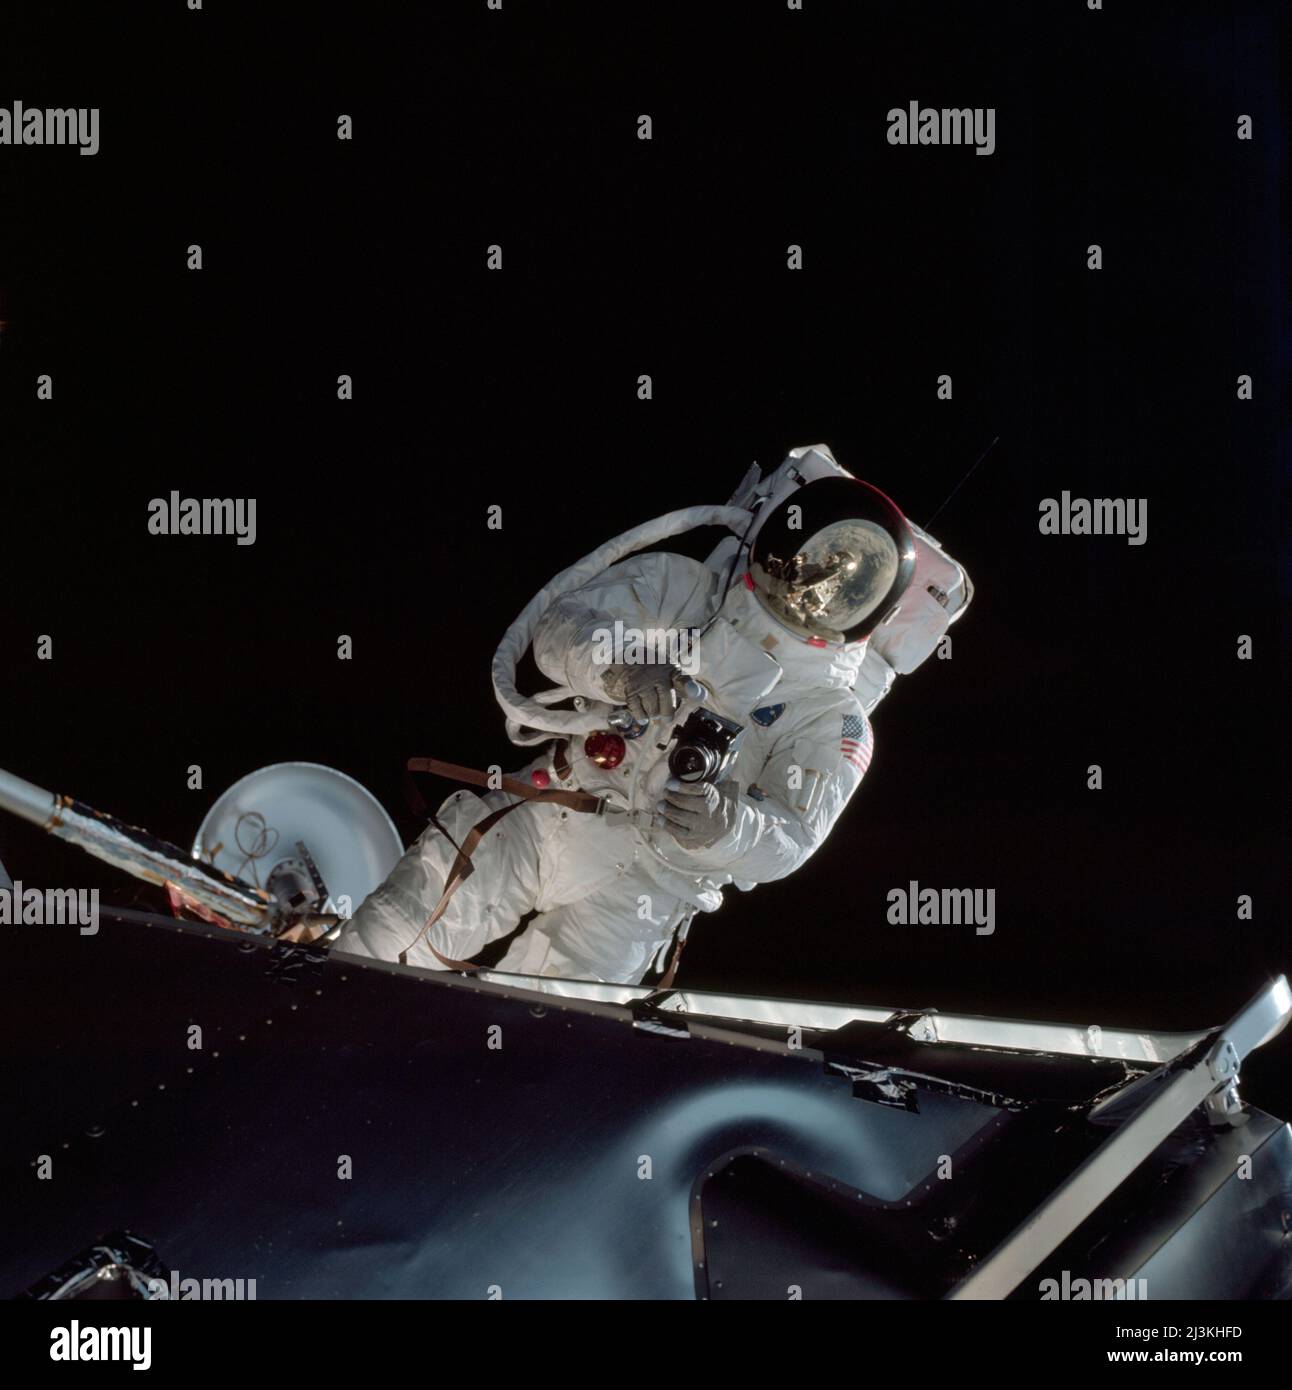 Astronaut Russell Schweickart,taking photos during a spacewalk during teh Apollo 9 mission.  Schweickart, wearing an Extravehicular Mobility Unit (EMU), is standing in 'golden slippers' on the Lunar Module porch. On his back, partially visible, are a Portable Life Support System (PLSS) and an Oxygen Purge System (OPS). Stock Photo